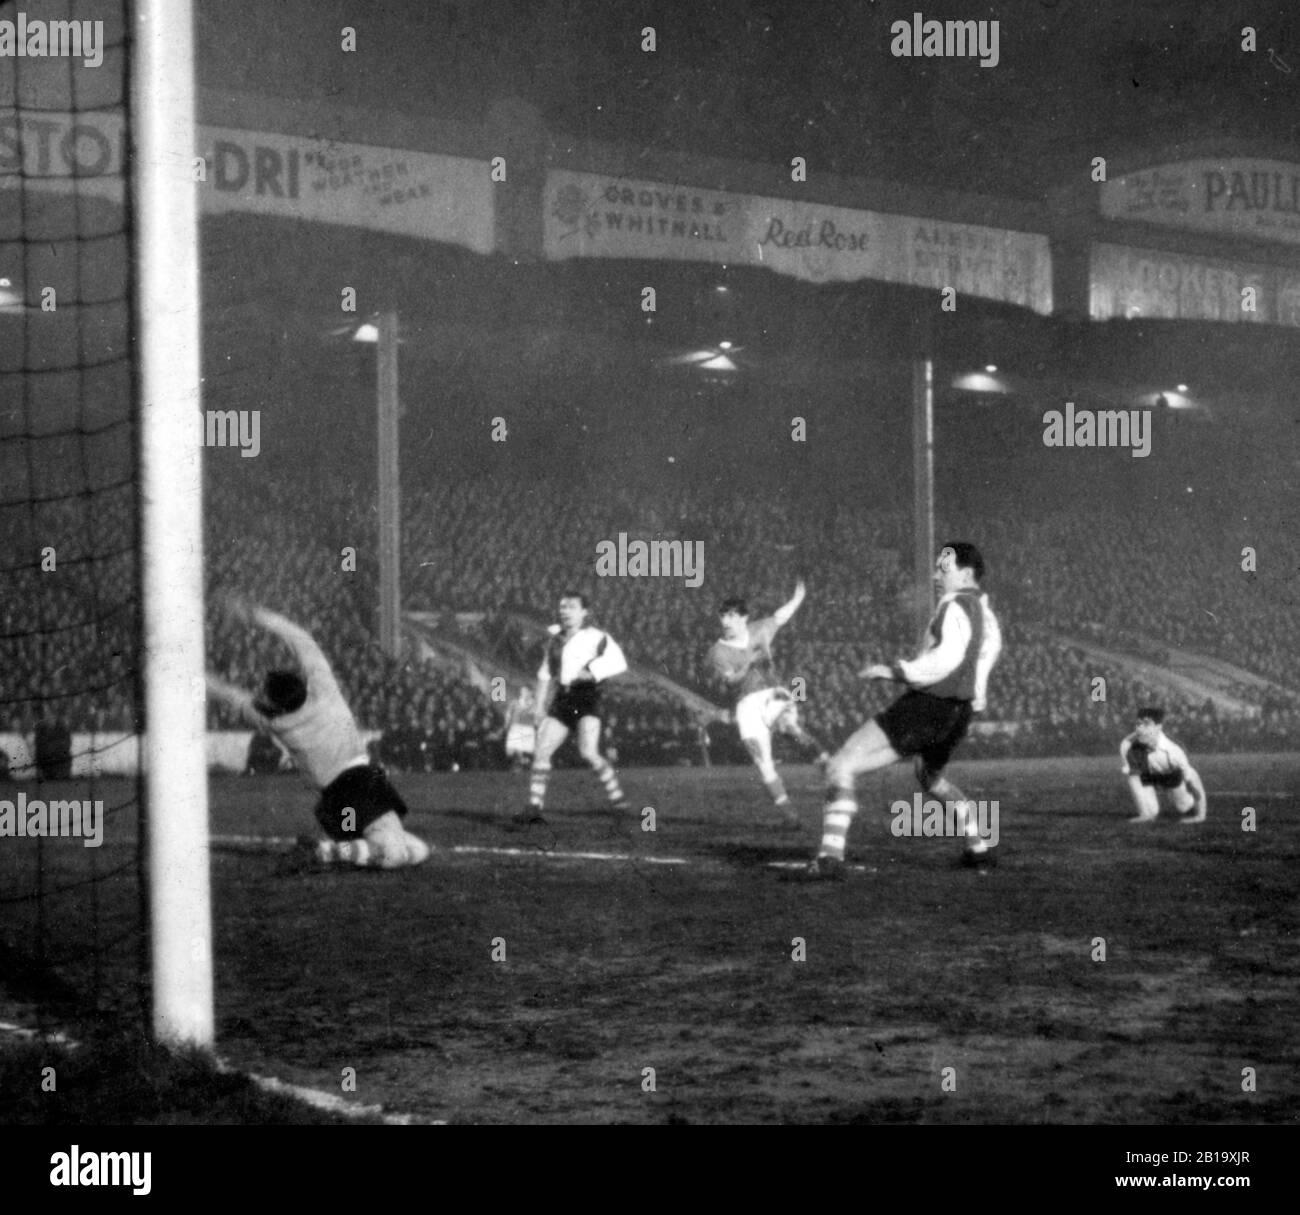 Manchester United inside left Dennis Viollet (centre, arm raised) scores his team's first goal in the European Cup match against Athletic Bilbao at Maine Road, Manchester. Athletic Bilbao's goalkeeper Carmelo Cedrun is on his knees arms outstretched. *SCANNED FROM CONTACT AS NEG IS CORRUPT Stock Photo